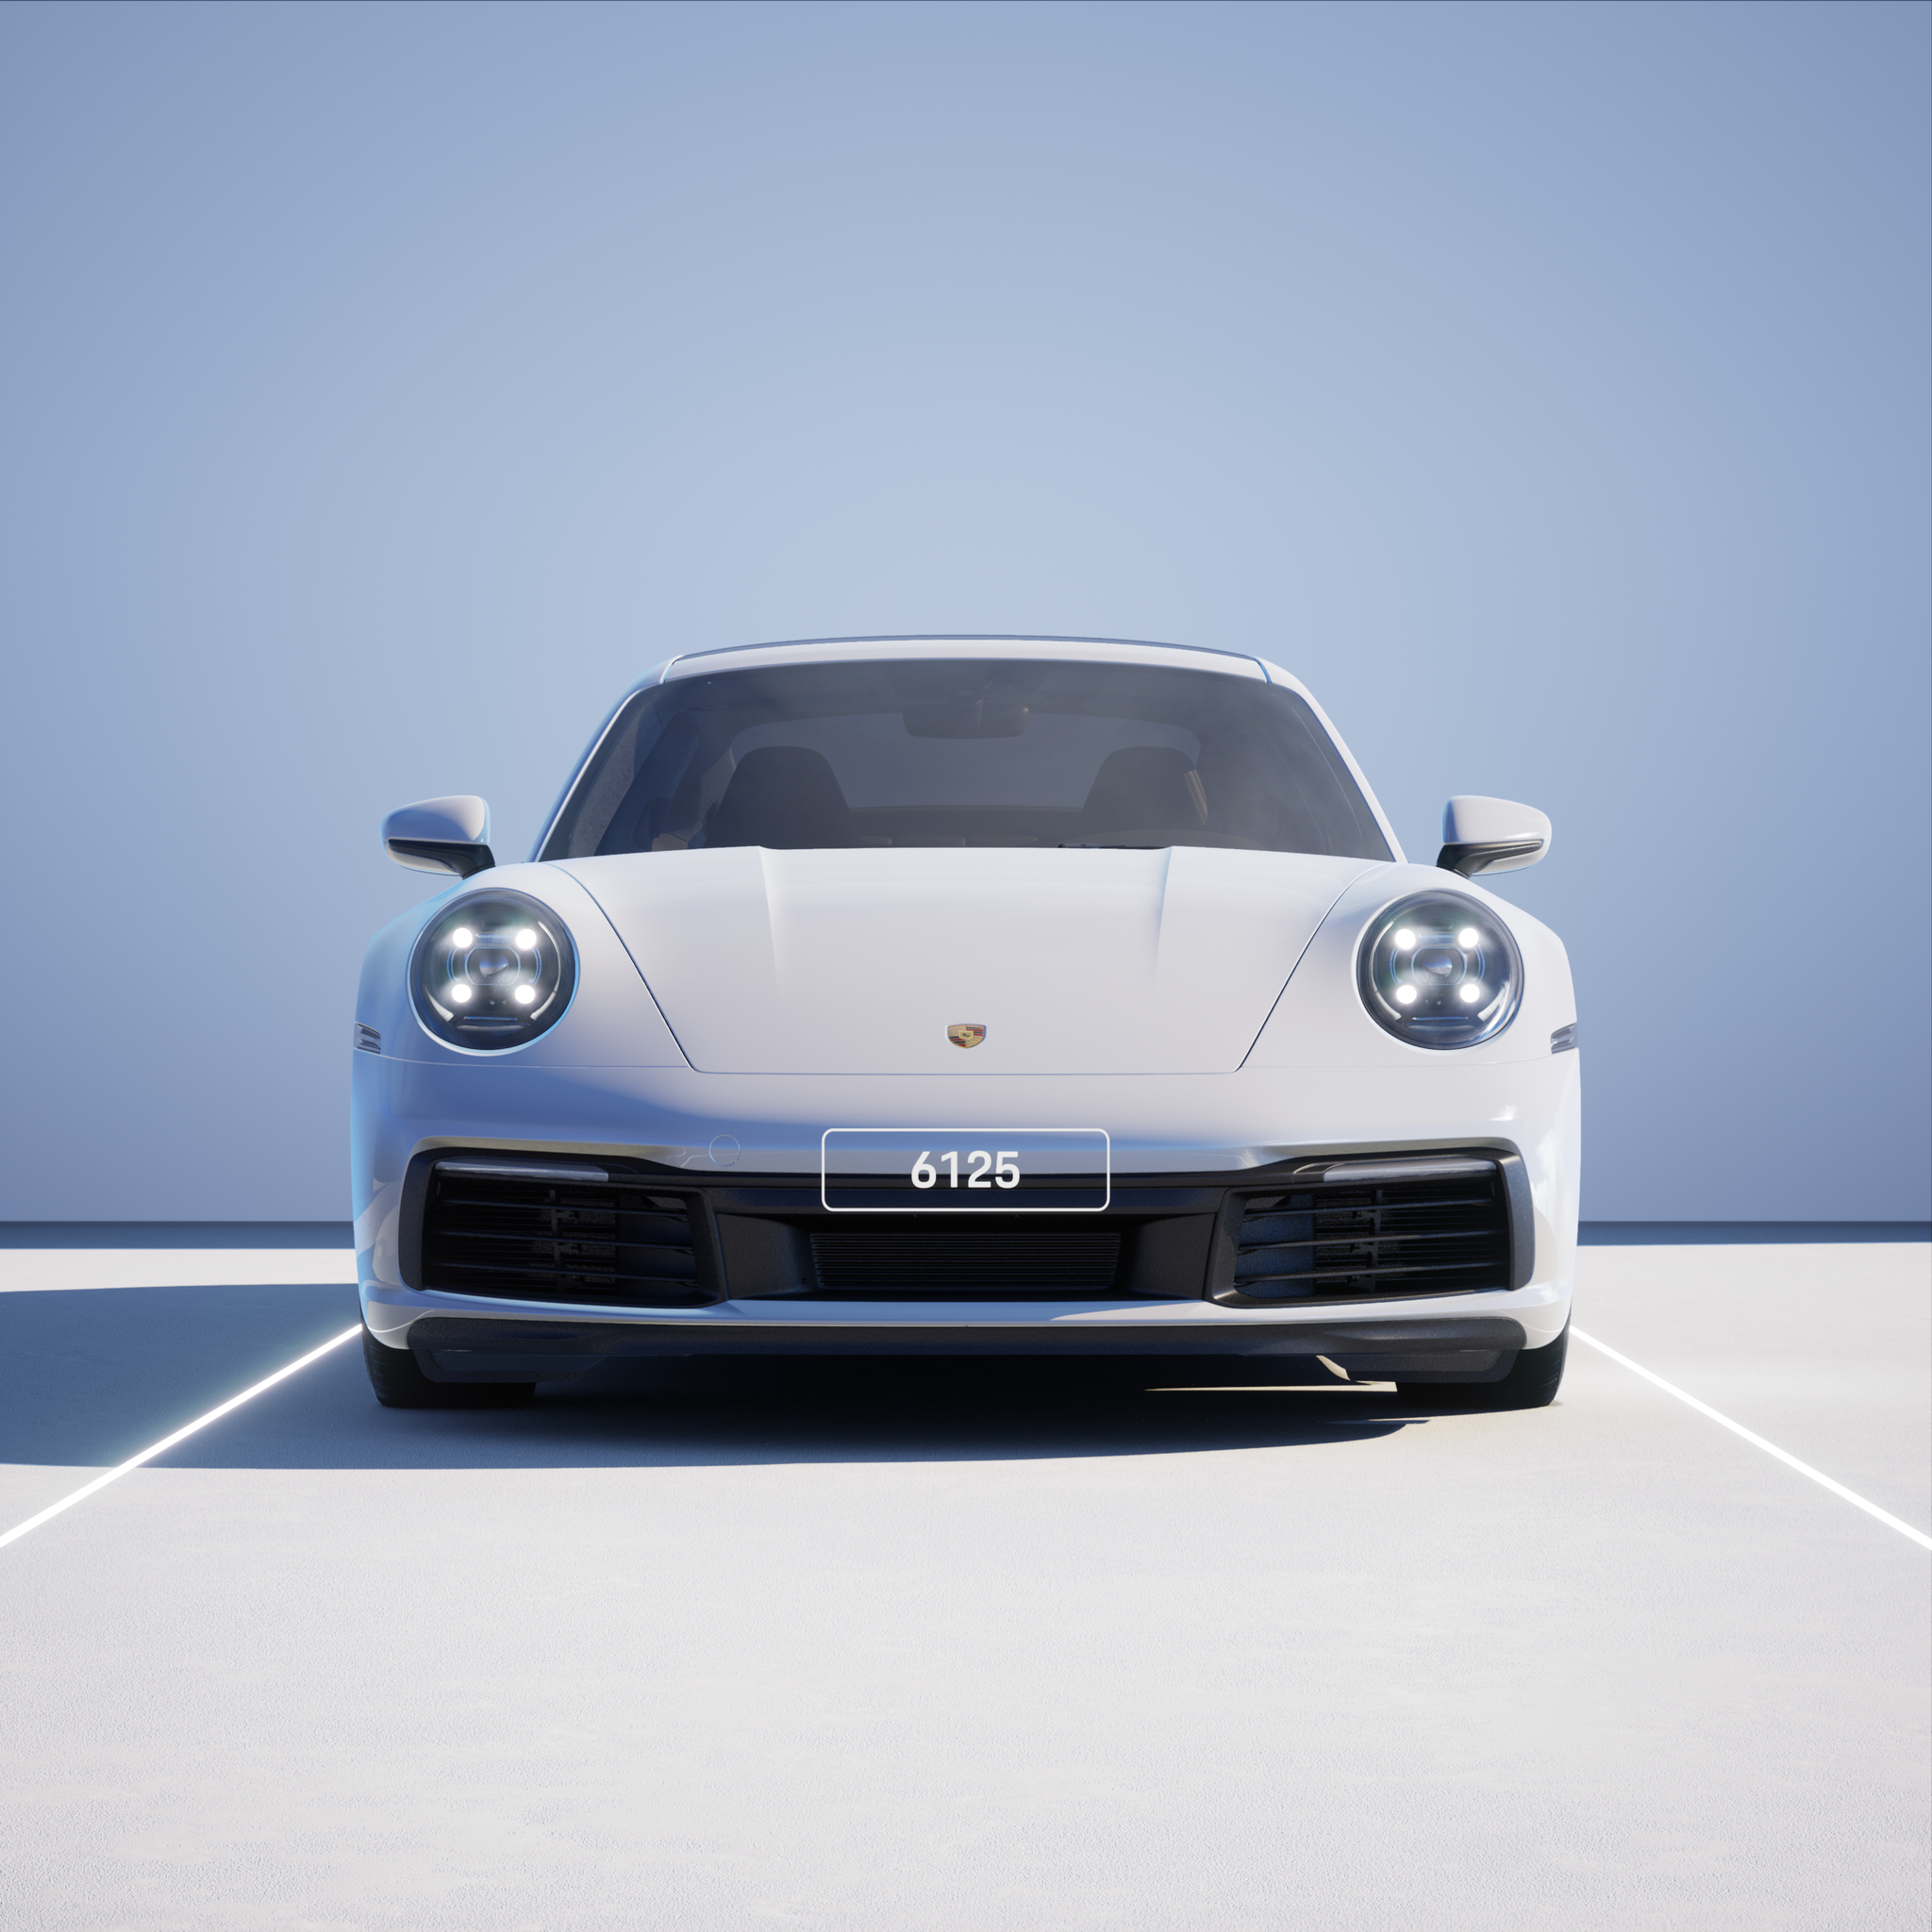 The PORSCHΞ 911 6125 image in phase